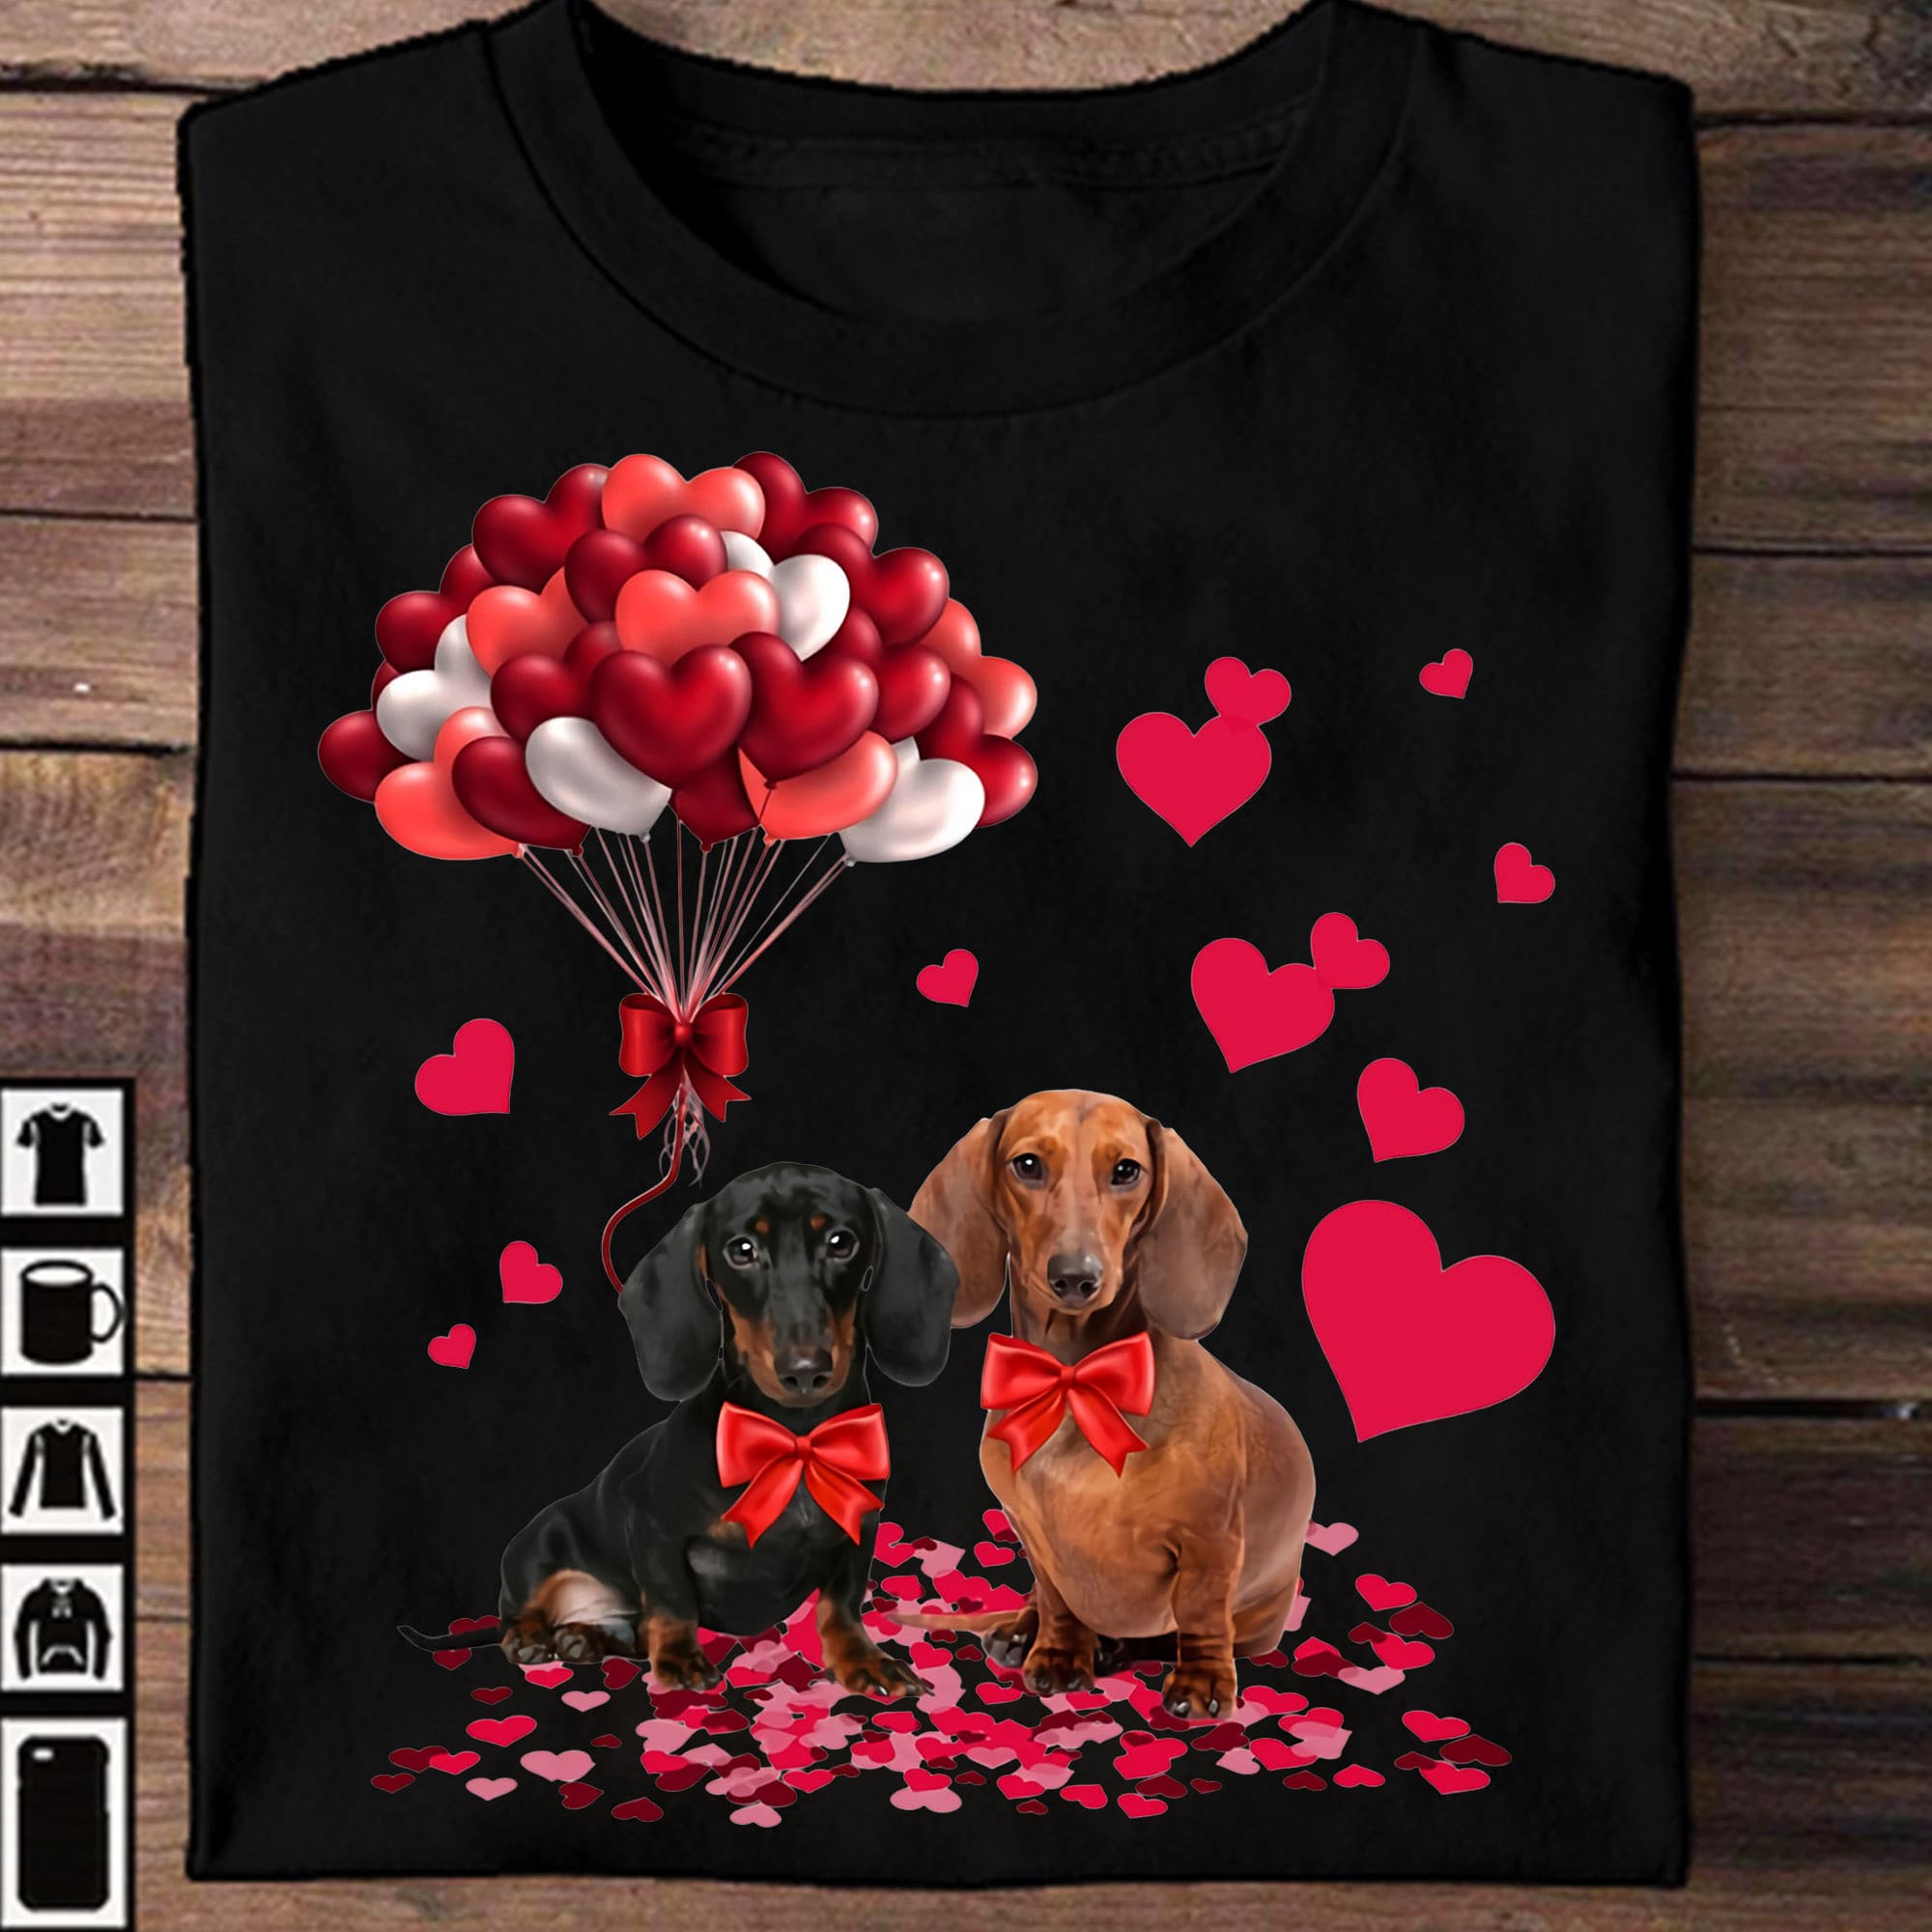 Dachshund and Valentine - Valentine day T-shirt, Dachshund couple This T-Shirt, Hoodie, Sweatshirt, Ladies T-Shirt, Youth T-shirt is for lovers like Dachshund and Valentine, Valentine day T-shirt, Dachshund couple . Shirt are much suitable for those who Love Hobbies, Holidays, Pets, Movies, Out Door, Sport.